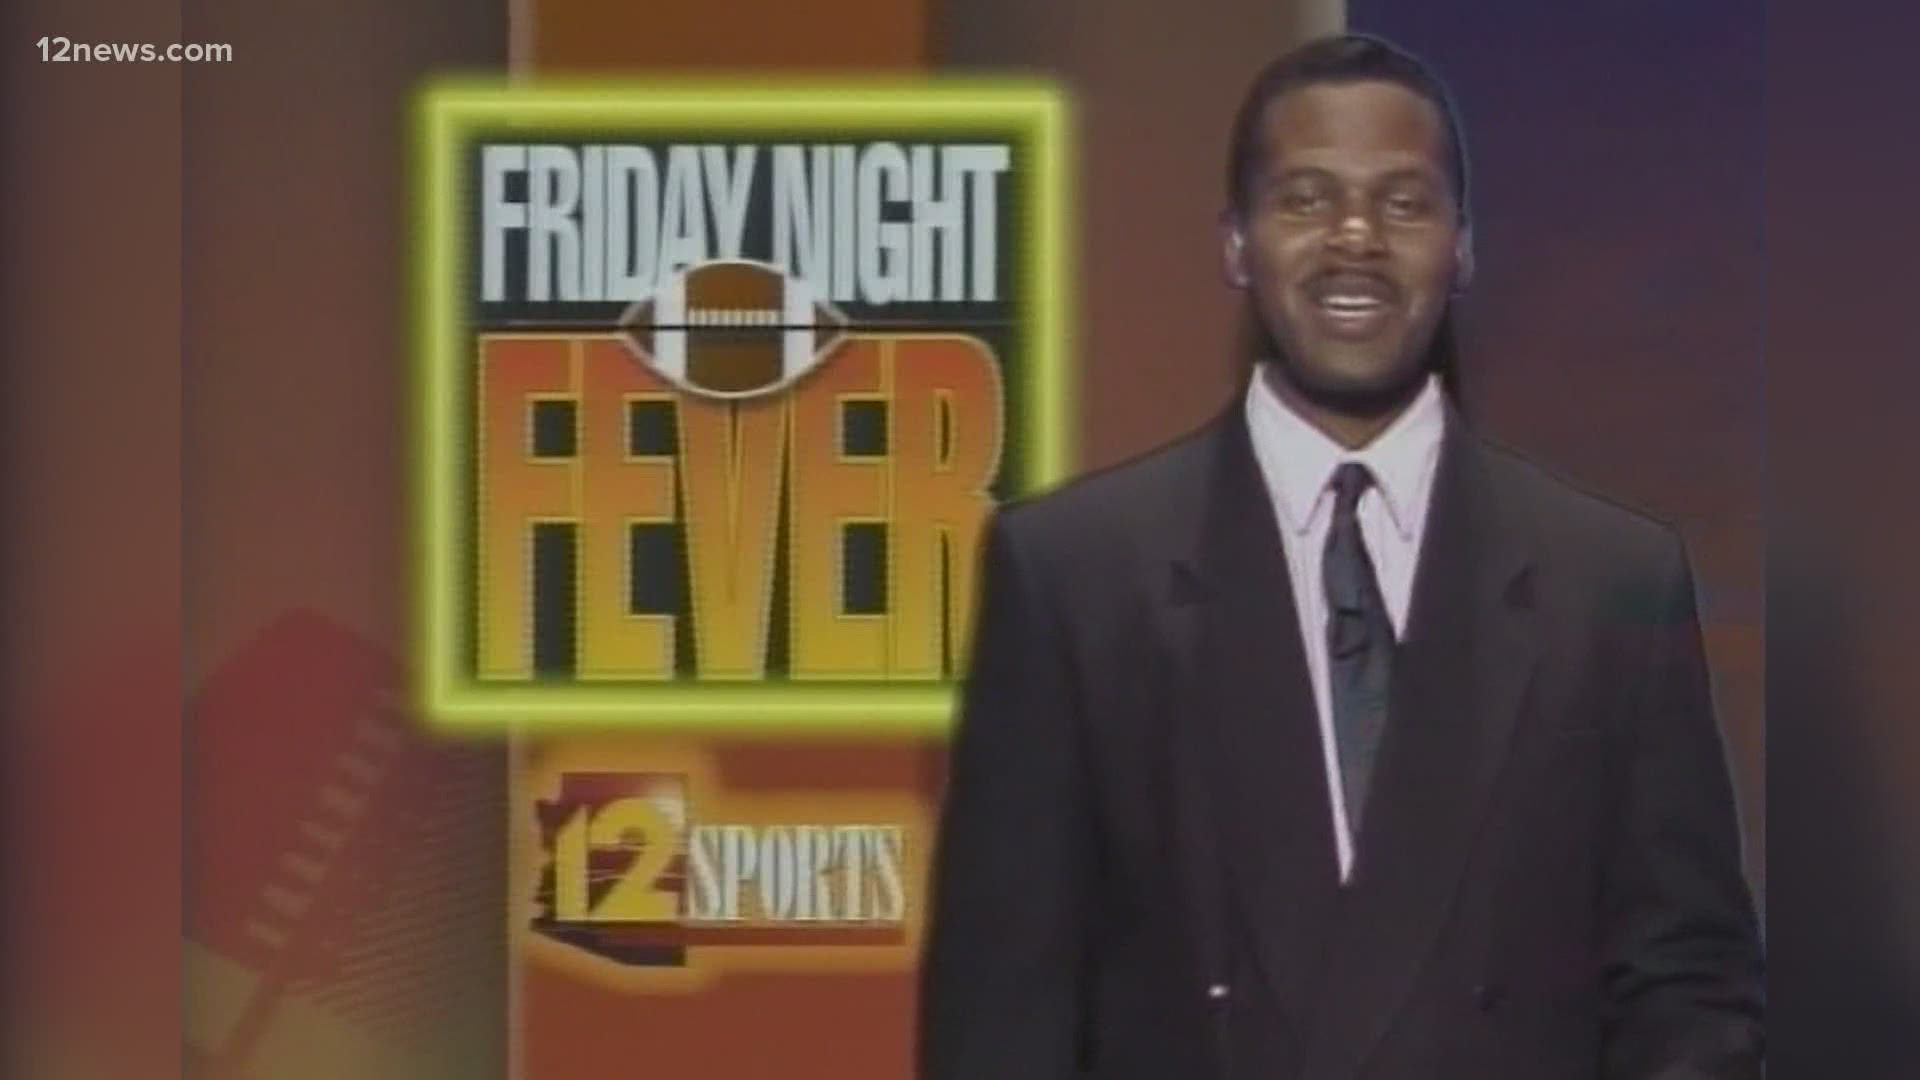 For 30 years, Bruce Cooper brought high school football into your living rooms every Friday night with "Friday Night Fever."